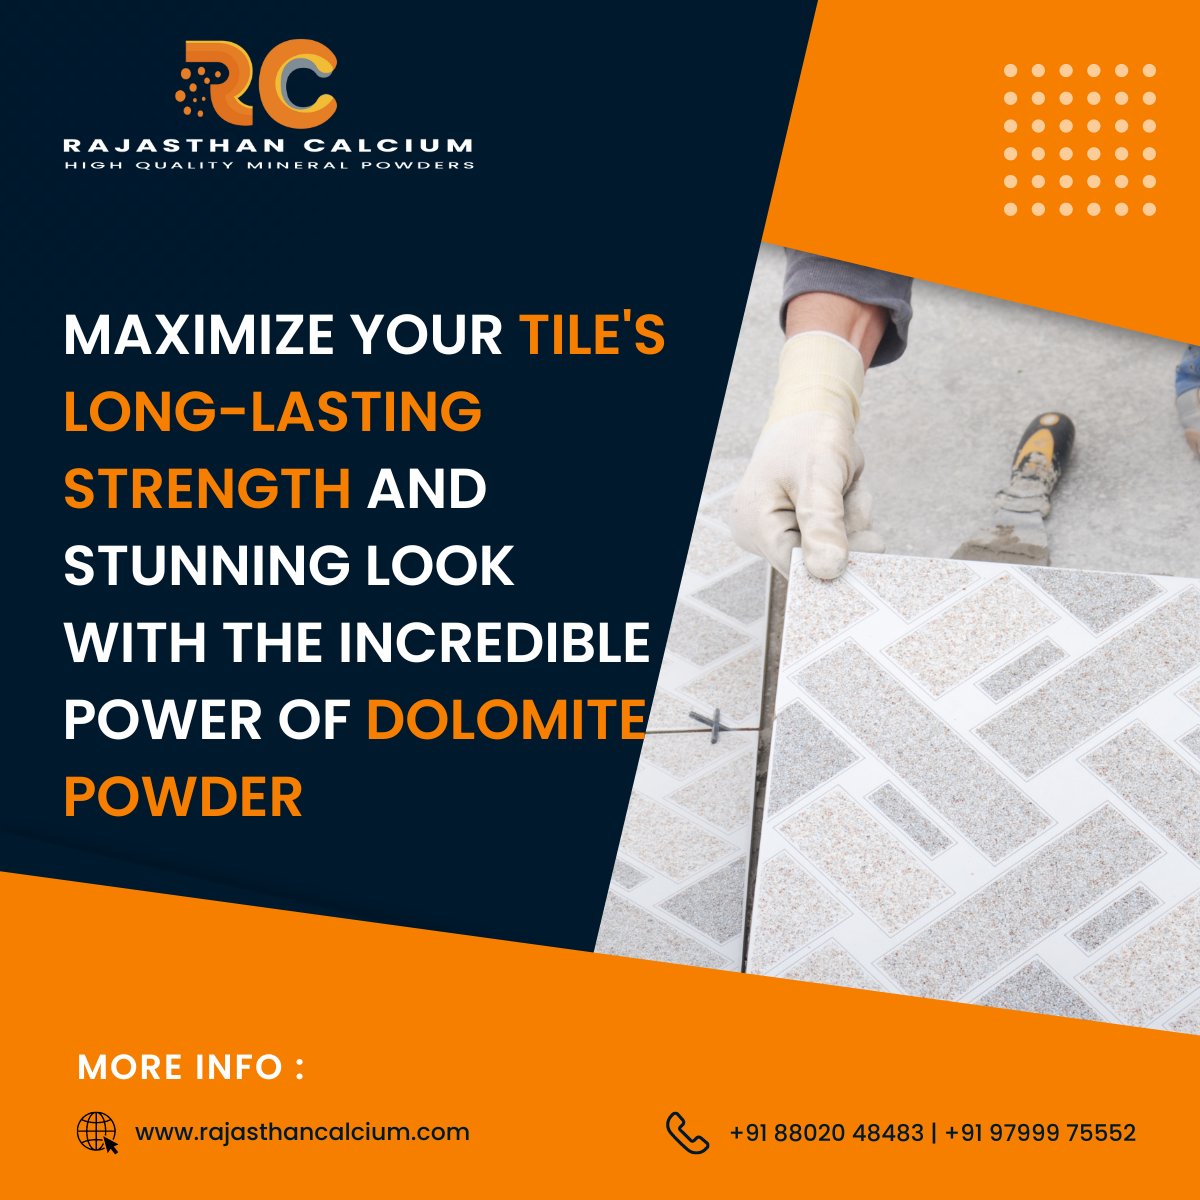 Dolomite powder is a game-changer, extending your tiles' lifetime and aesthetic appeal. Choose the finest Dolomite powder from Rajasthan Calcium to give your tiles an enchanting glow that will wow everyone.

#RajasthanCalcium #DolomitePowder #VisuallyAppealing #DurableTiles